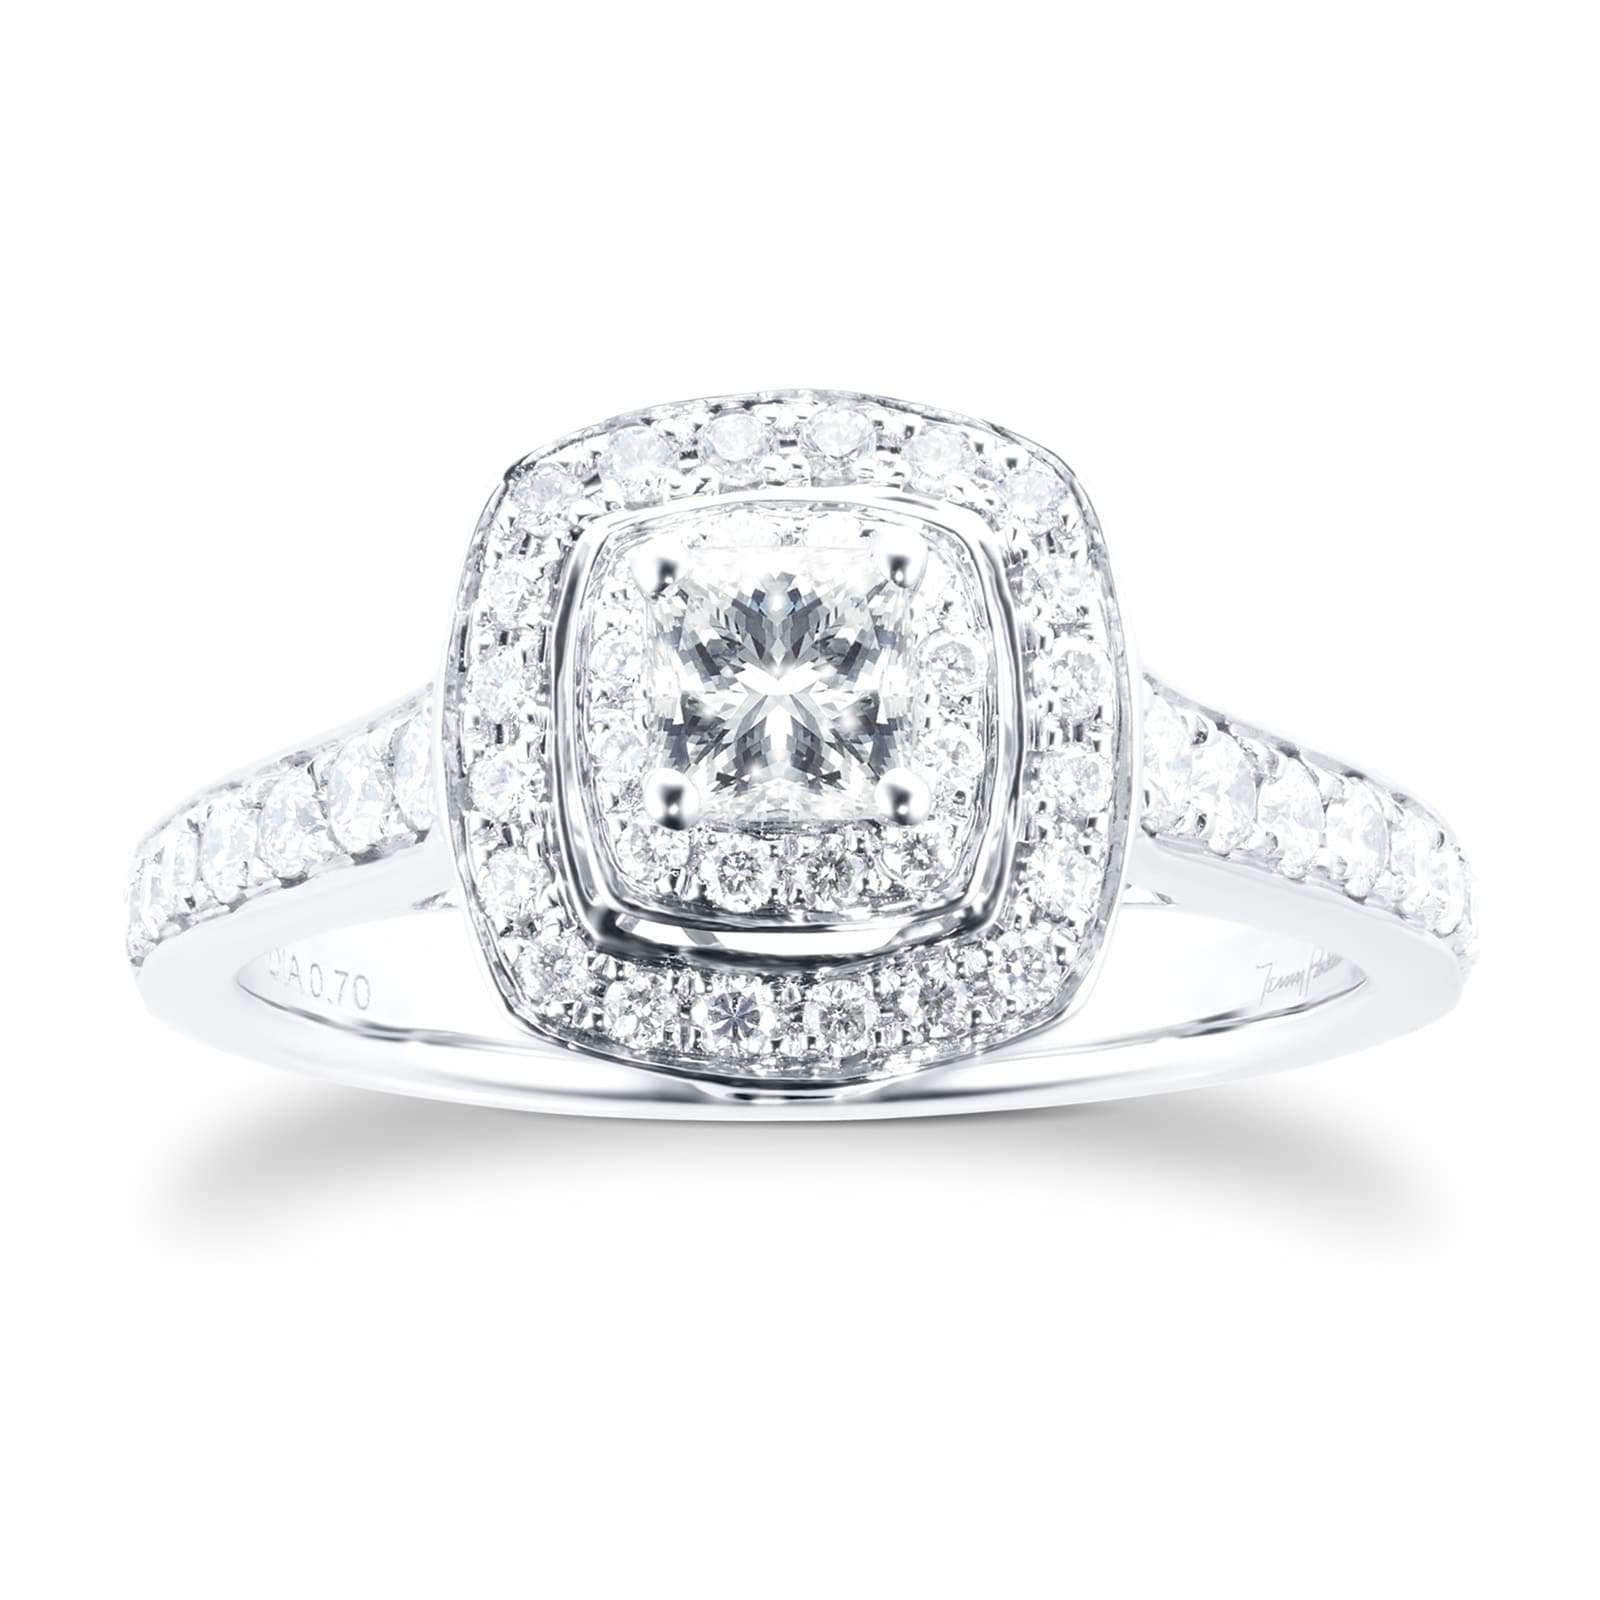 Cushion Cut 0.70 Carat Total Weight Double Halo Diamond Ring In 18 Carat White Gold - Ring Size L